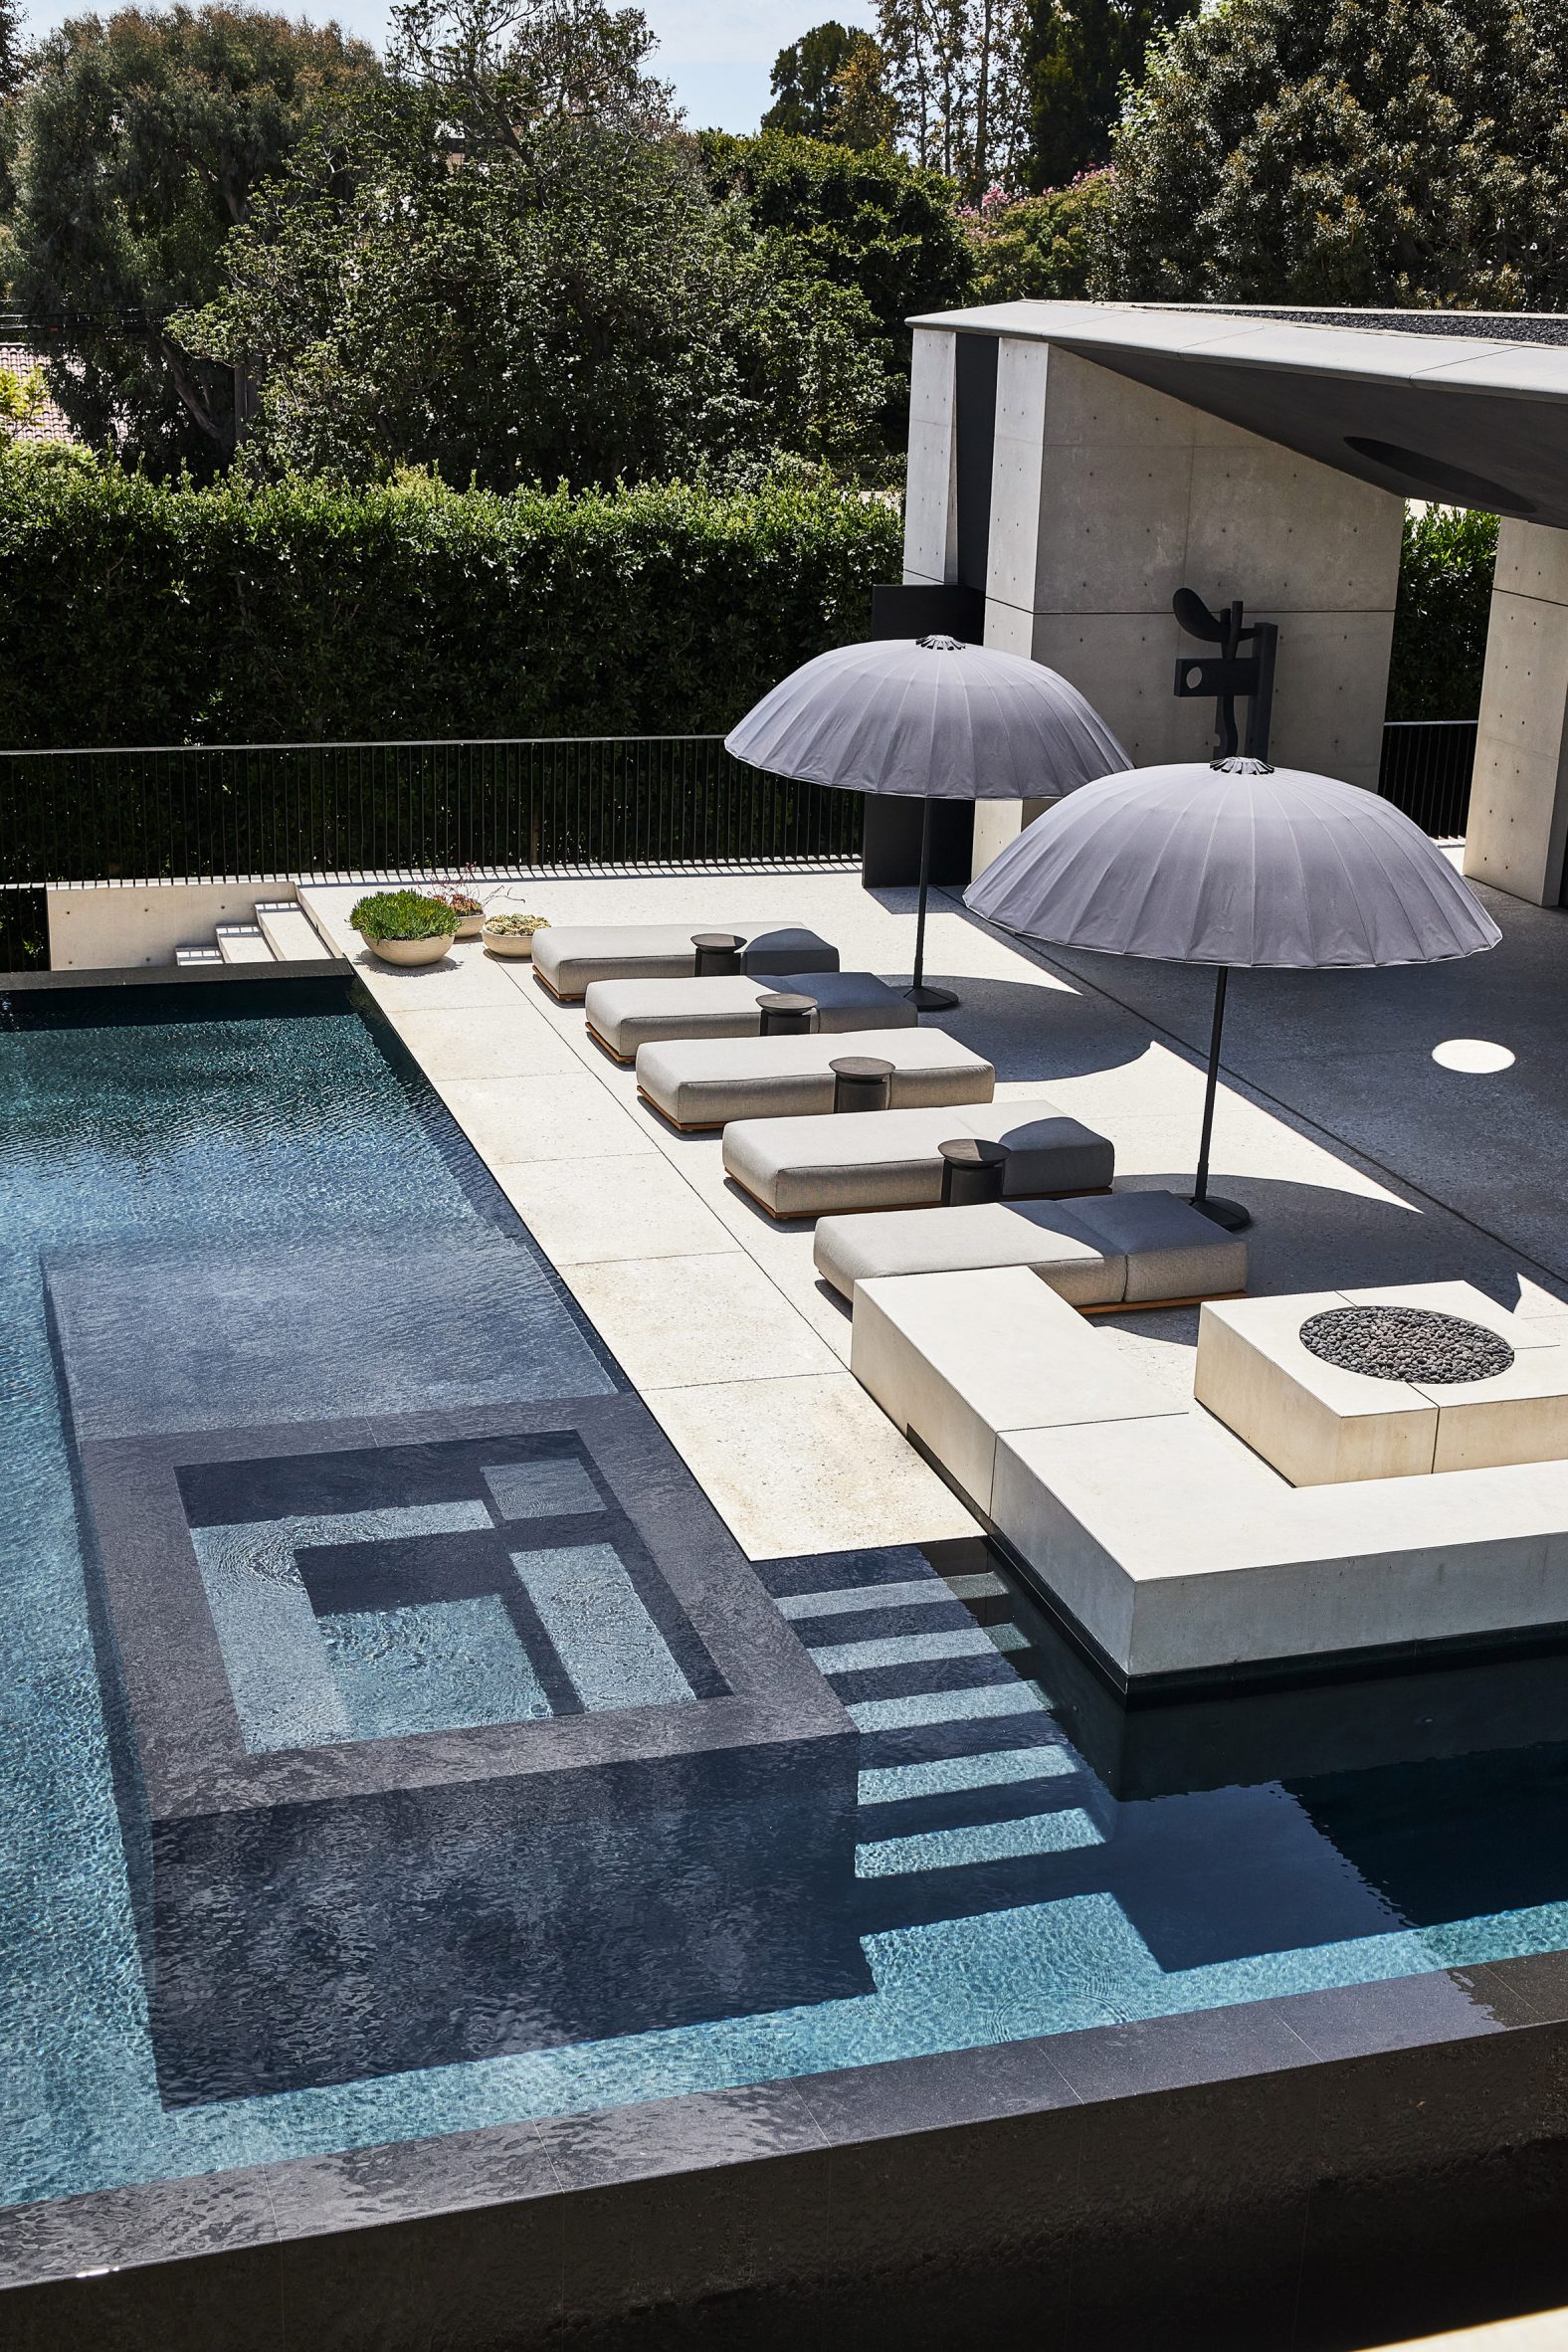 Swimming pool and terrace in front of a concrete pool house